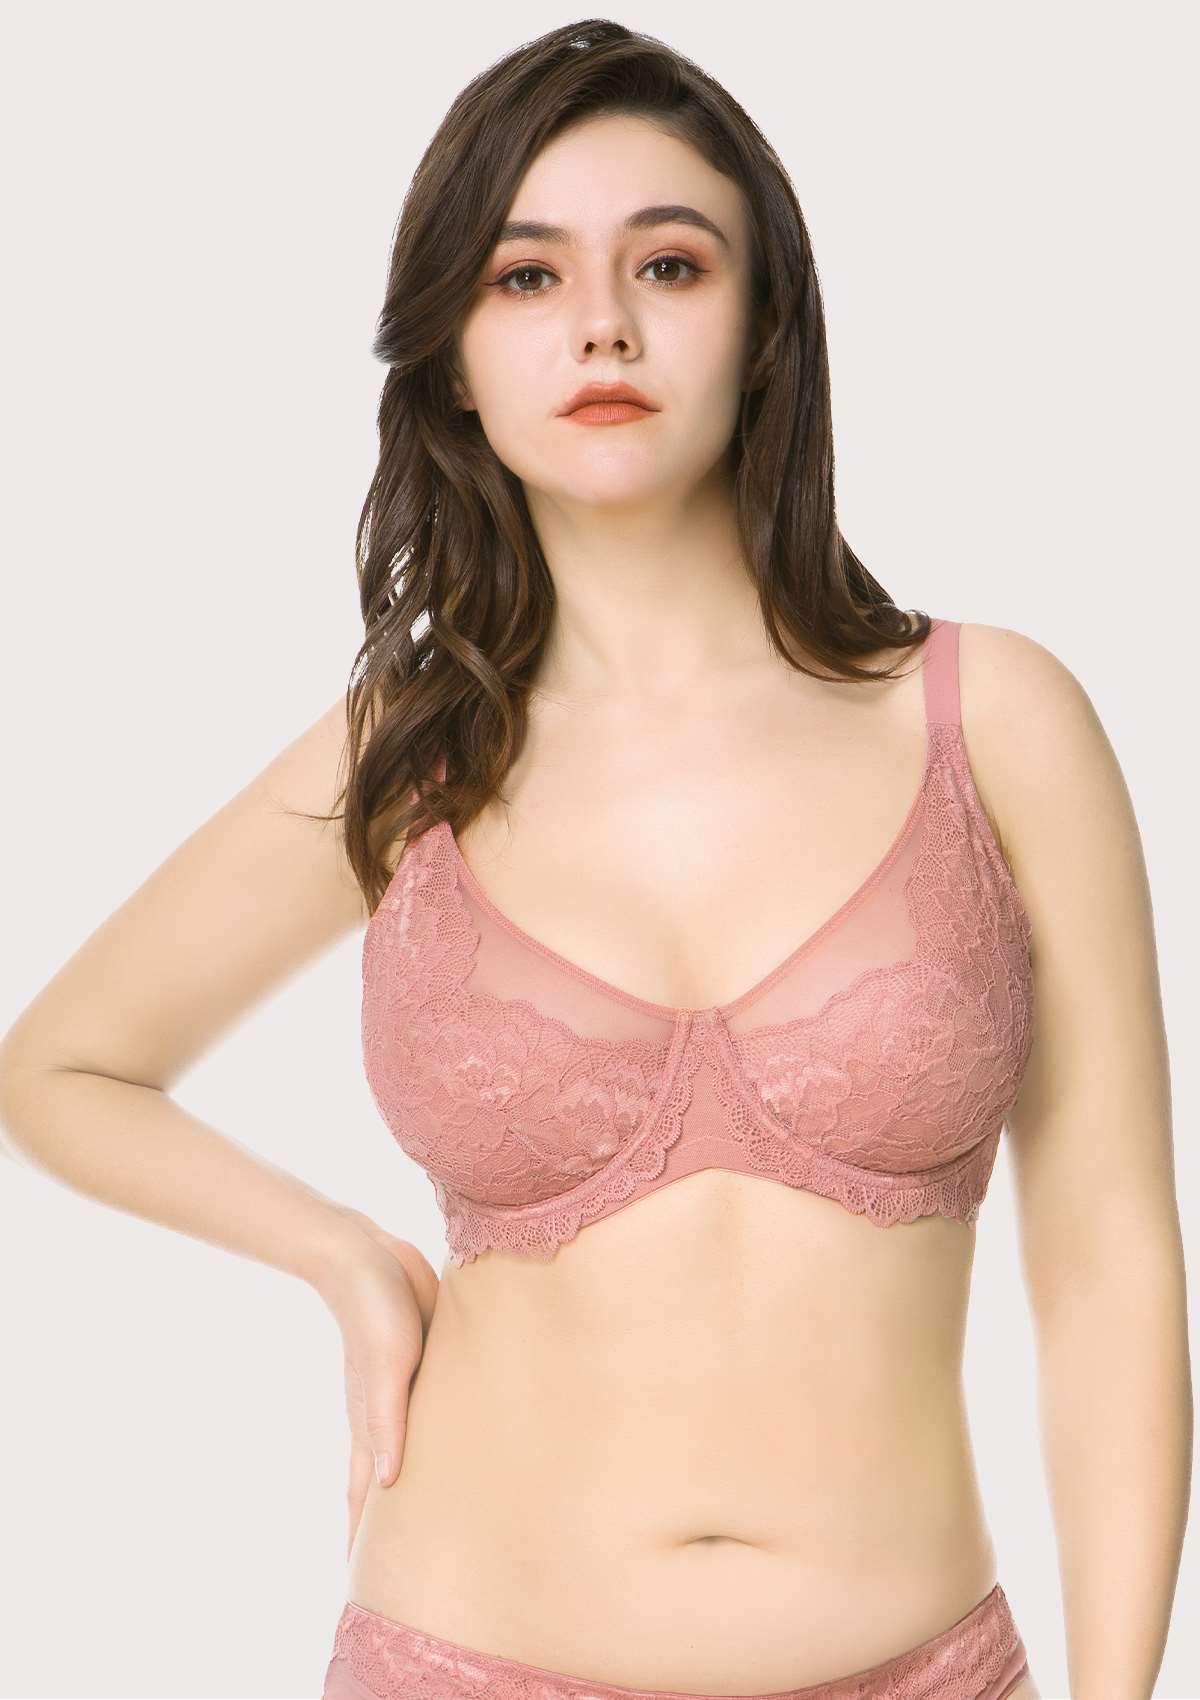 HSIA Peony Lace Unlined Supportive Underwire Bra - Green / 36 / D